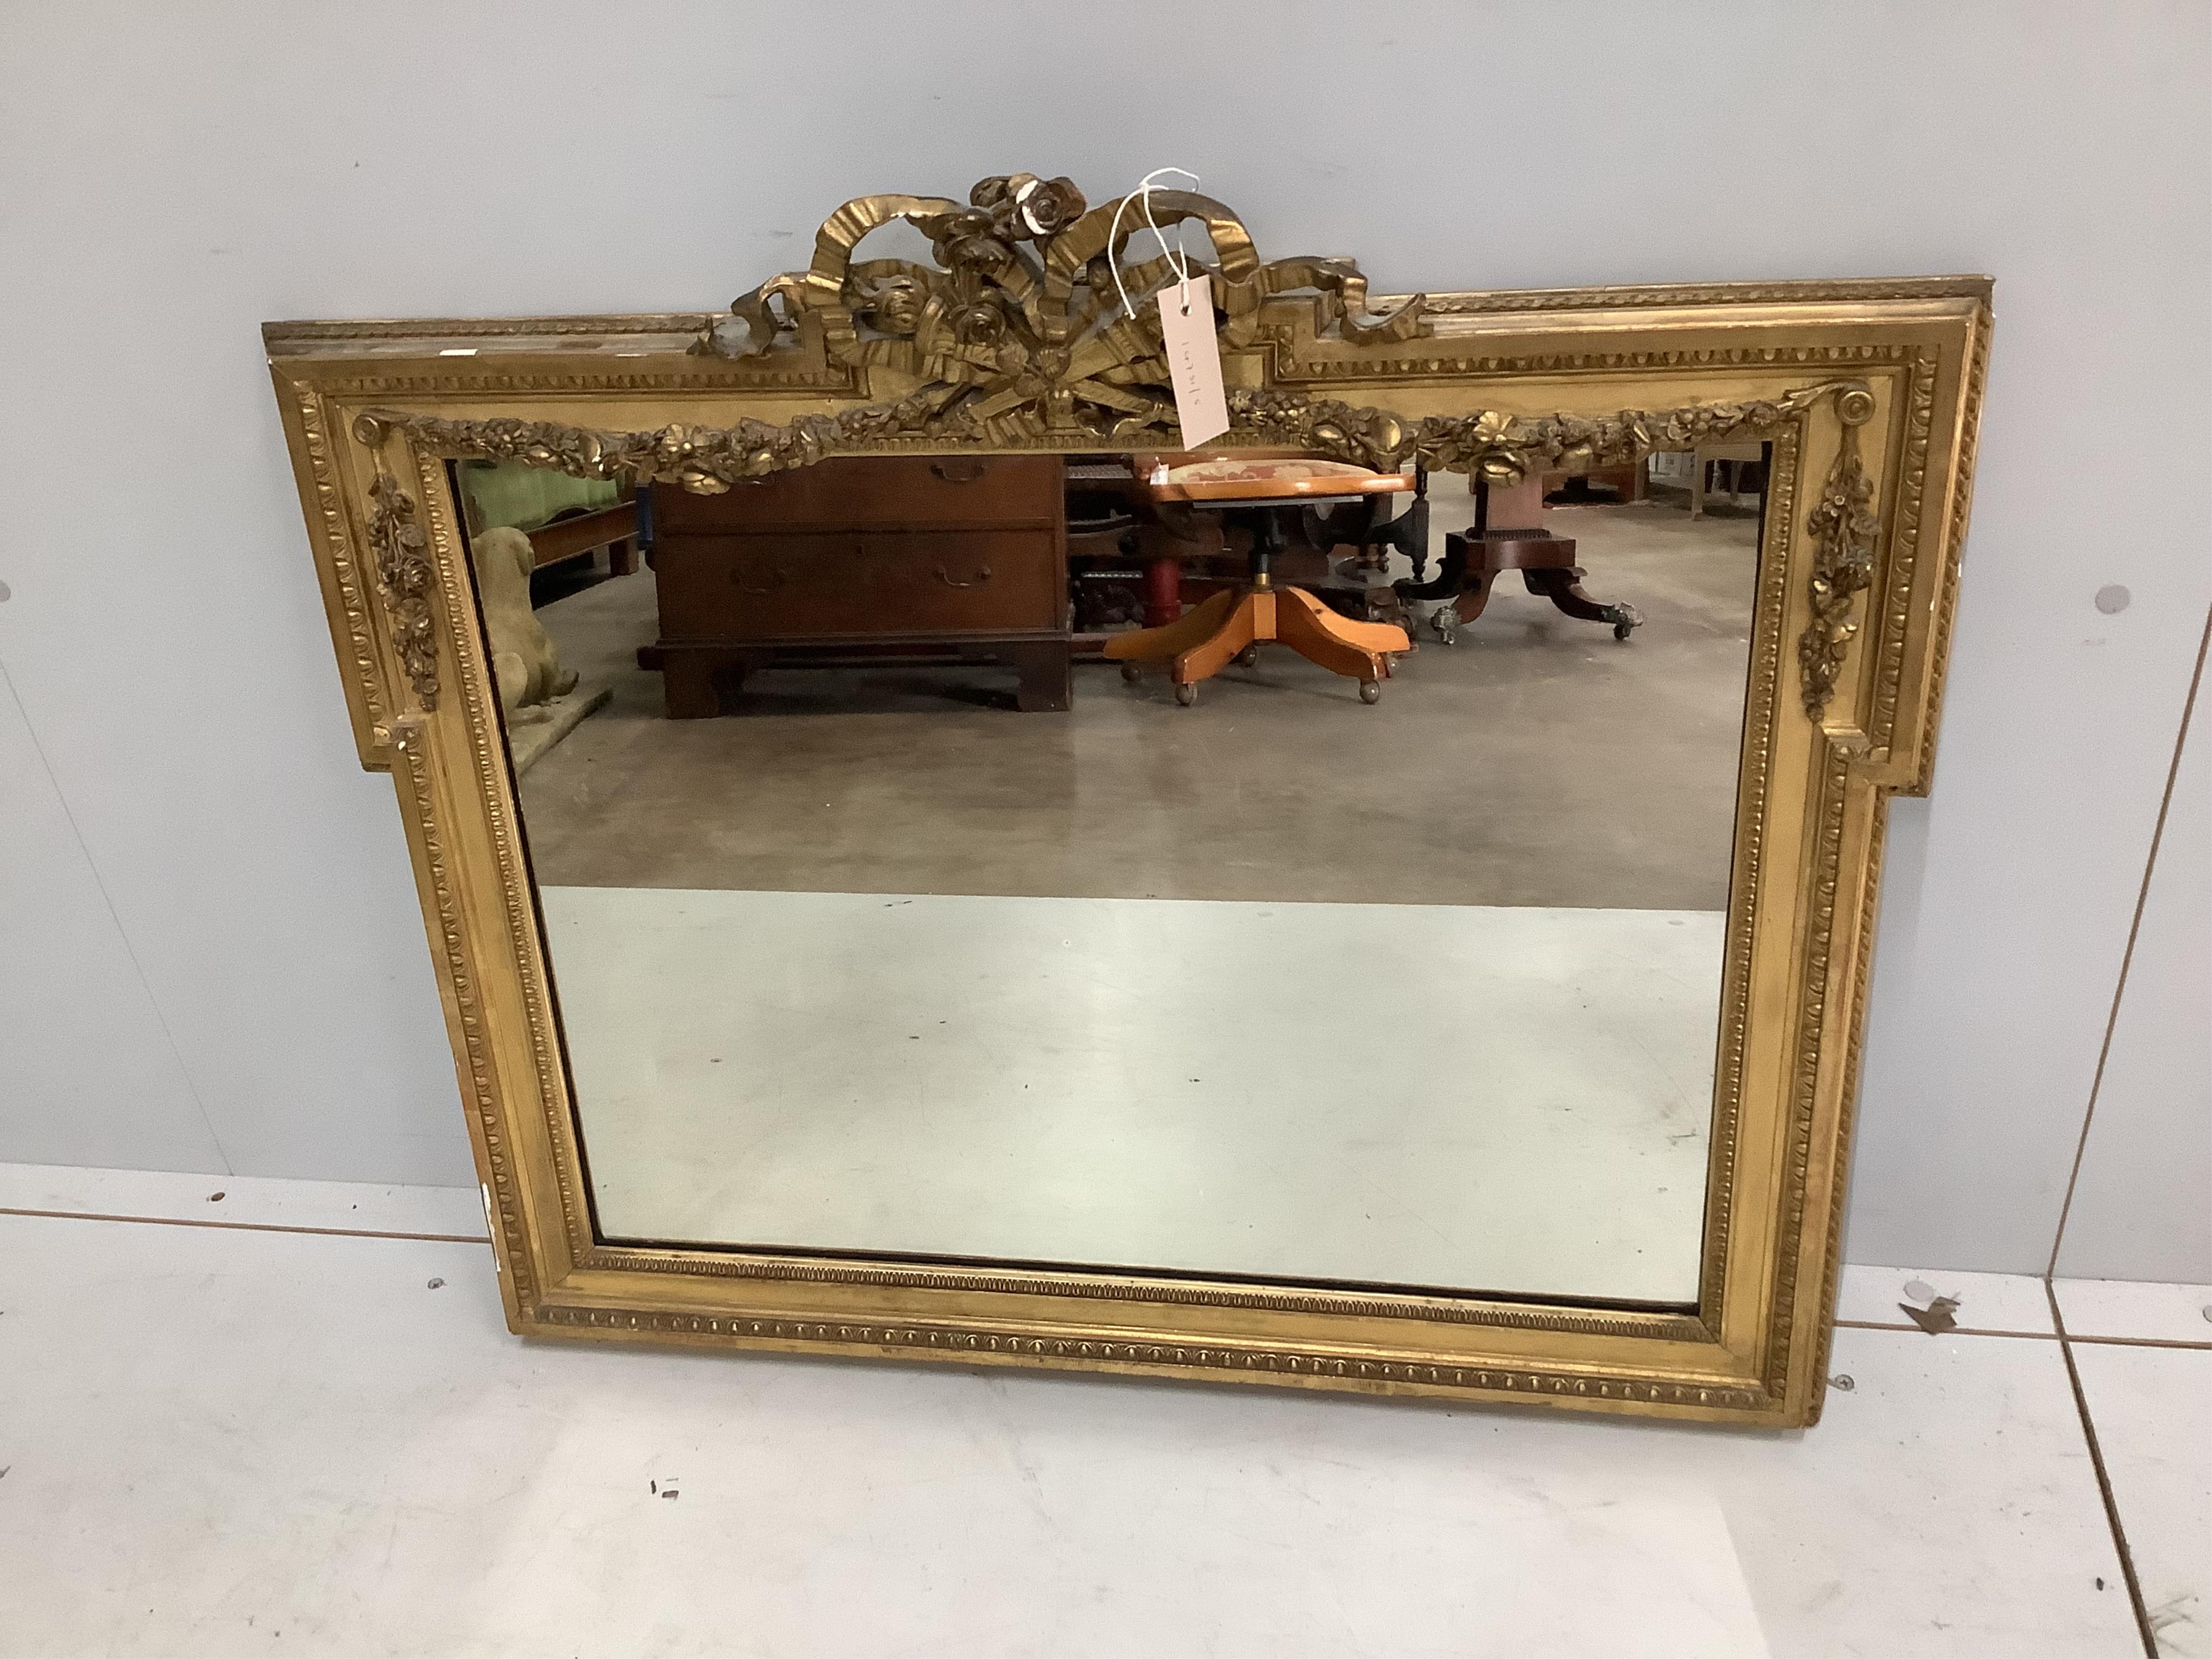 A 19th century French giltwood and composition wall mirror, width 84cm, height 70cm. Condition - fair